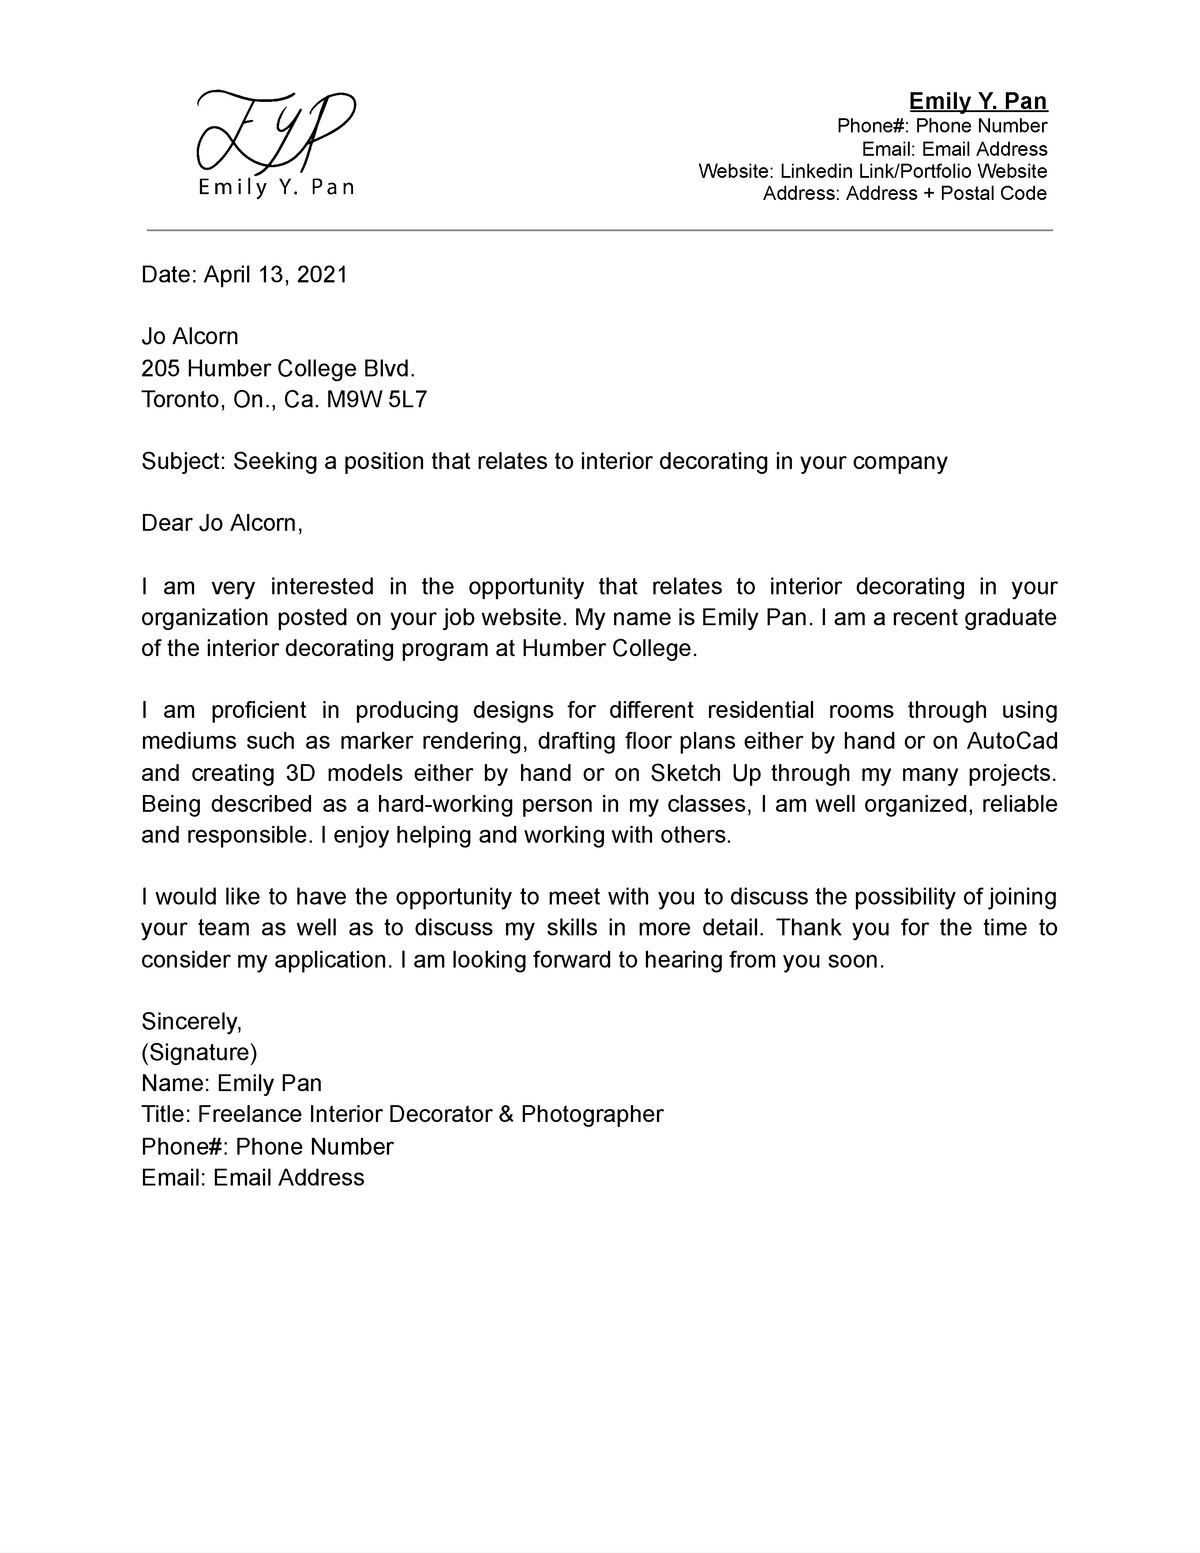 travel support letter humber college